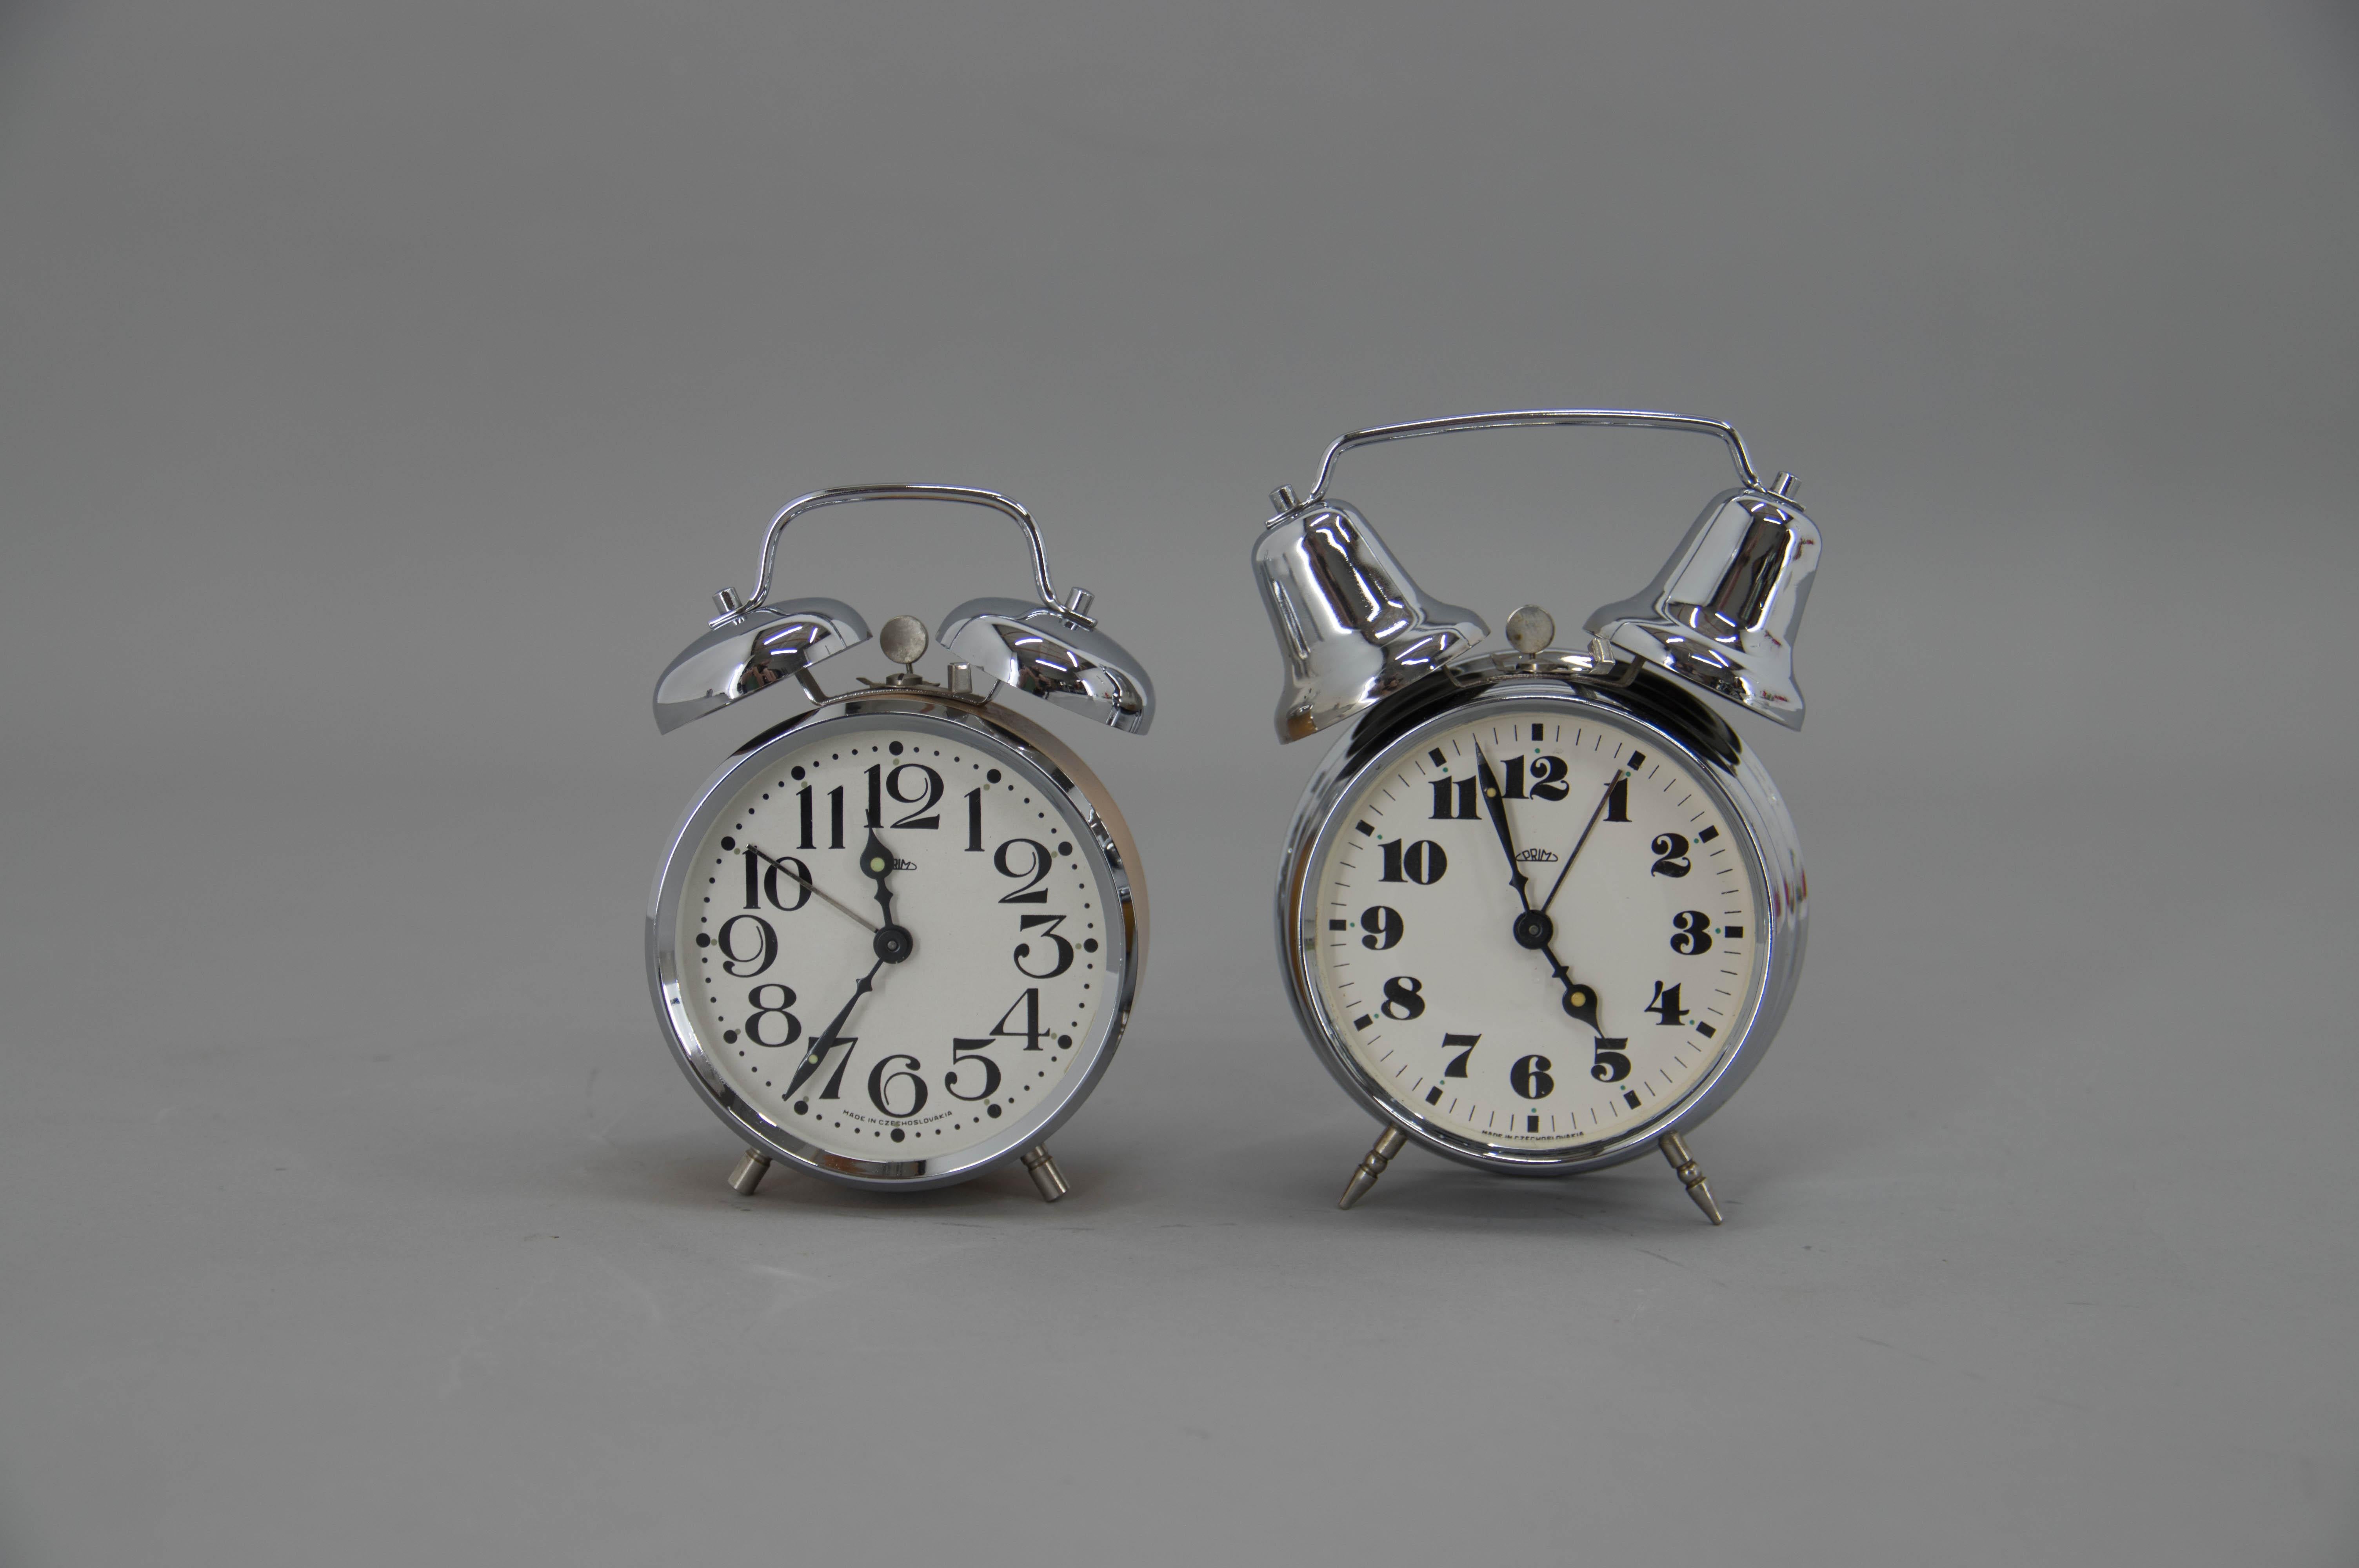 Set of two alarm clocks in very good original condition.
Made by PRIM in Czechoslovakia in 1980s.
Fully functional

